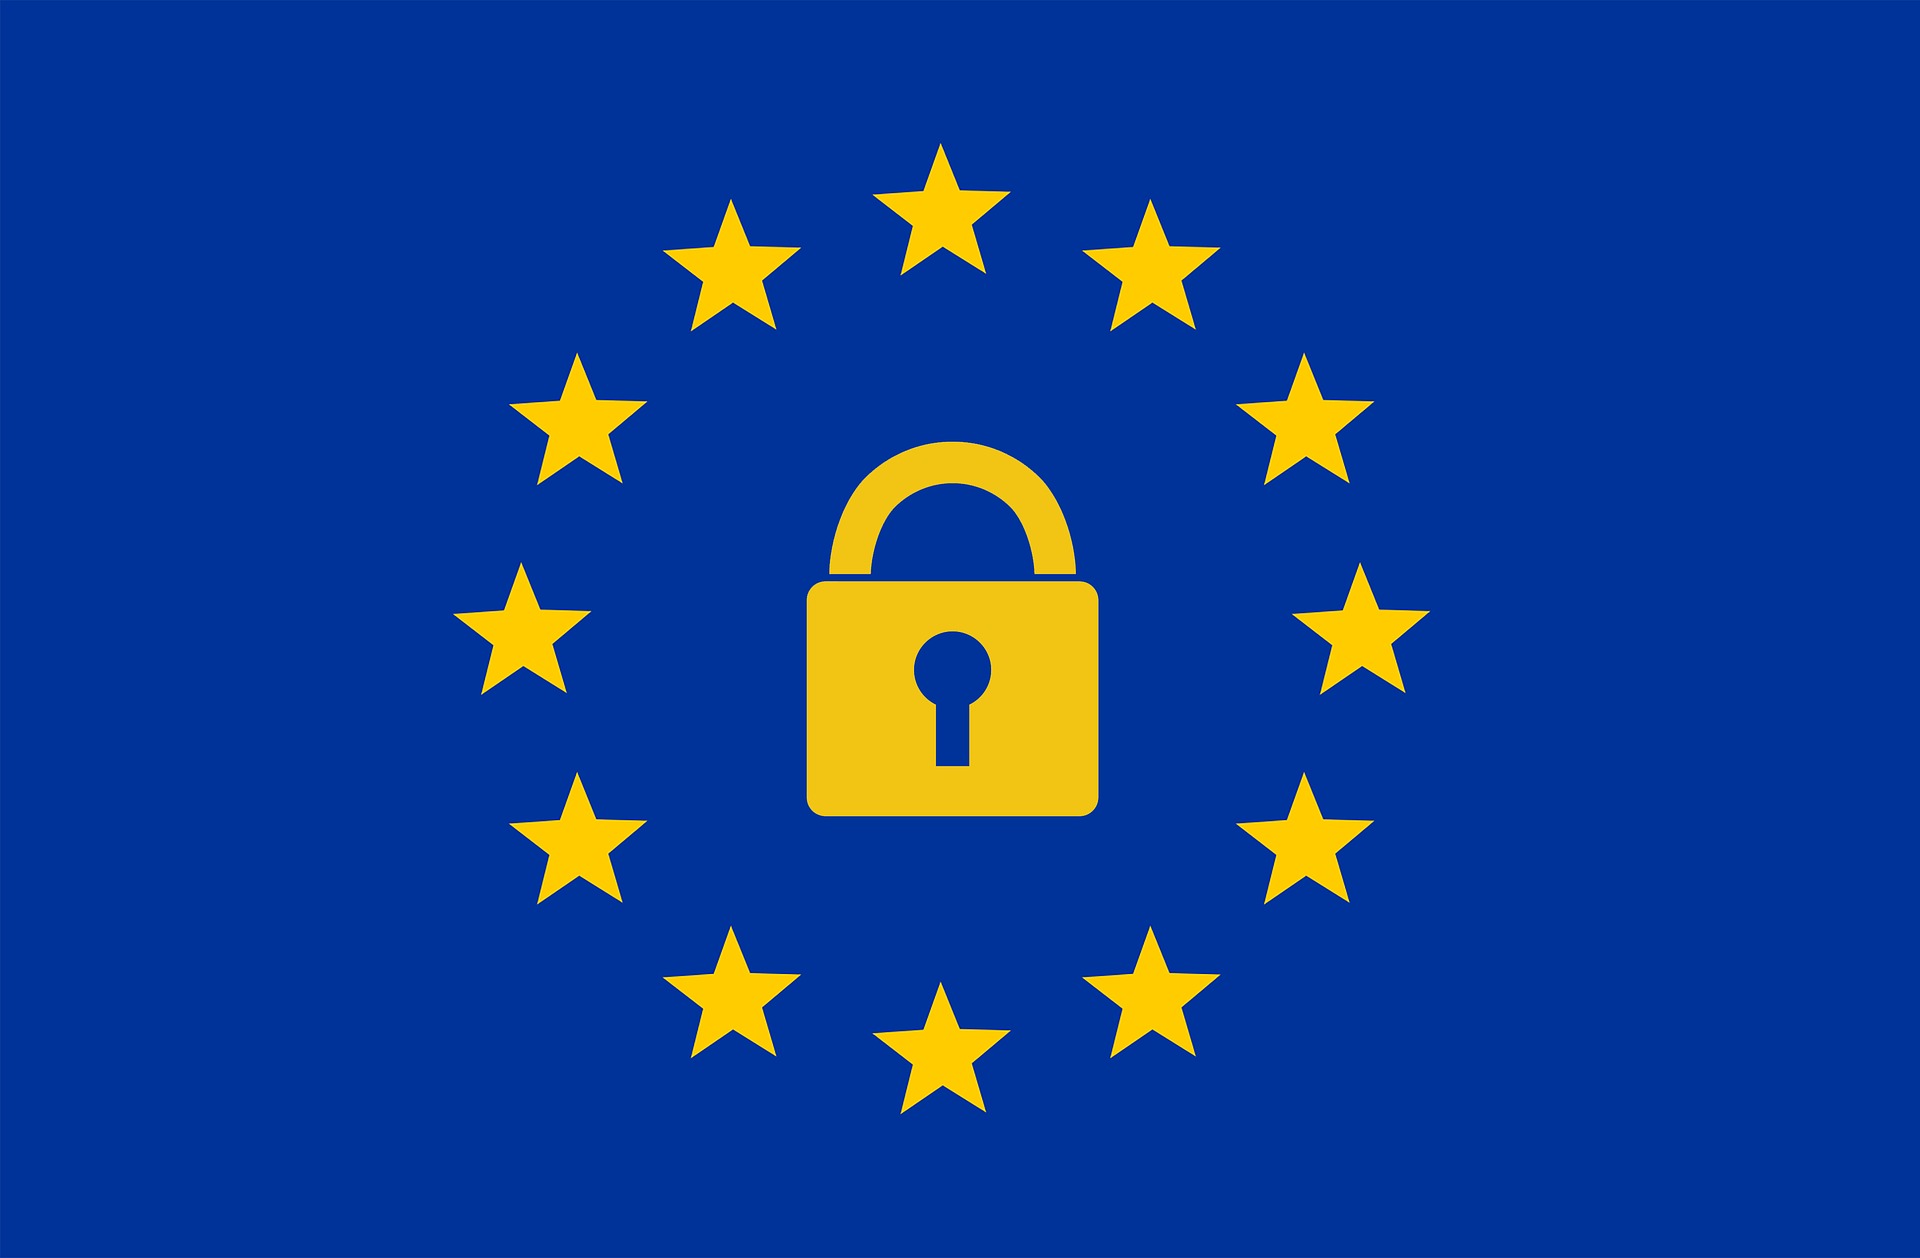 GDPR: A Global Standard for Data Privacy